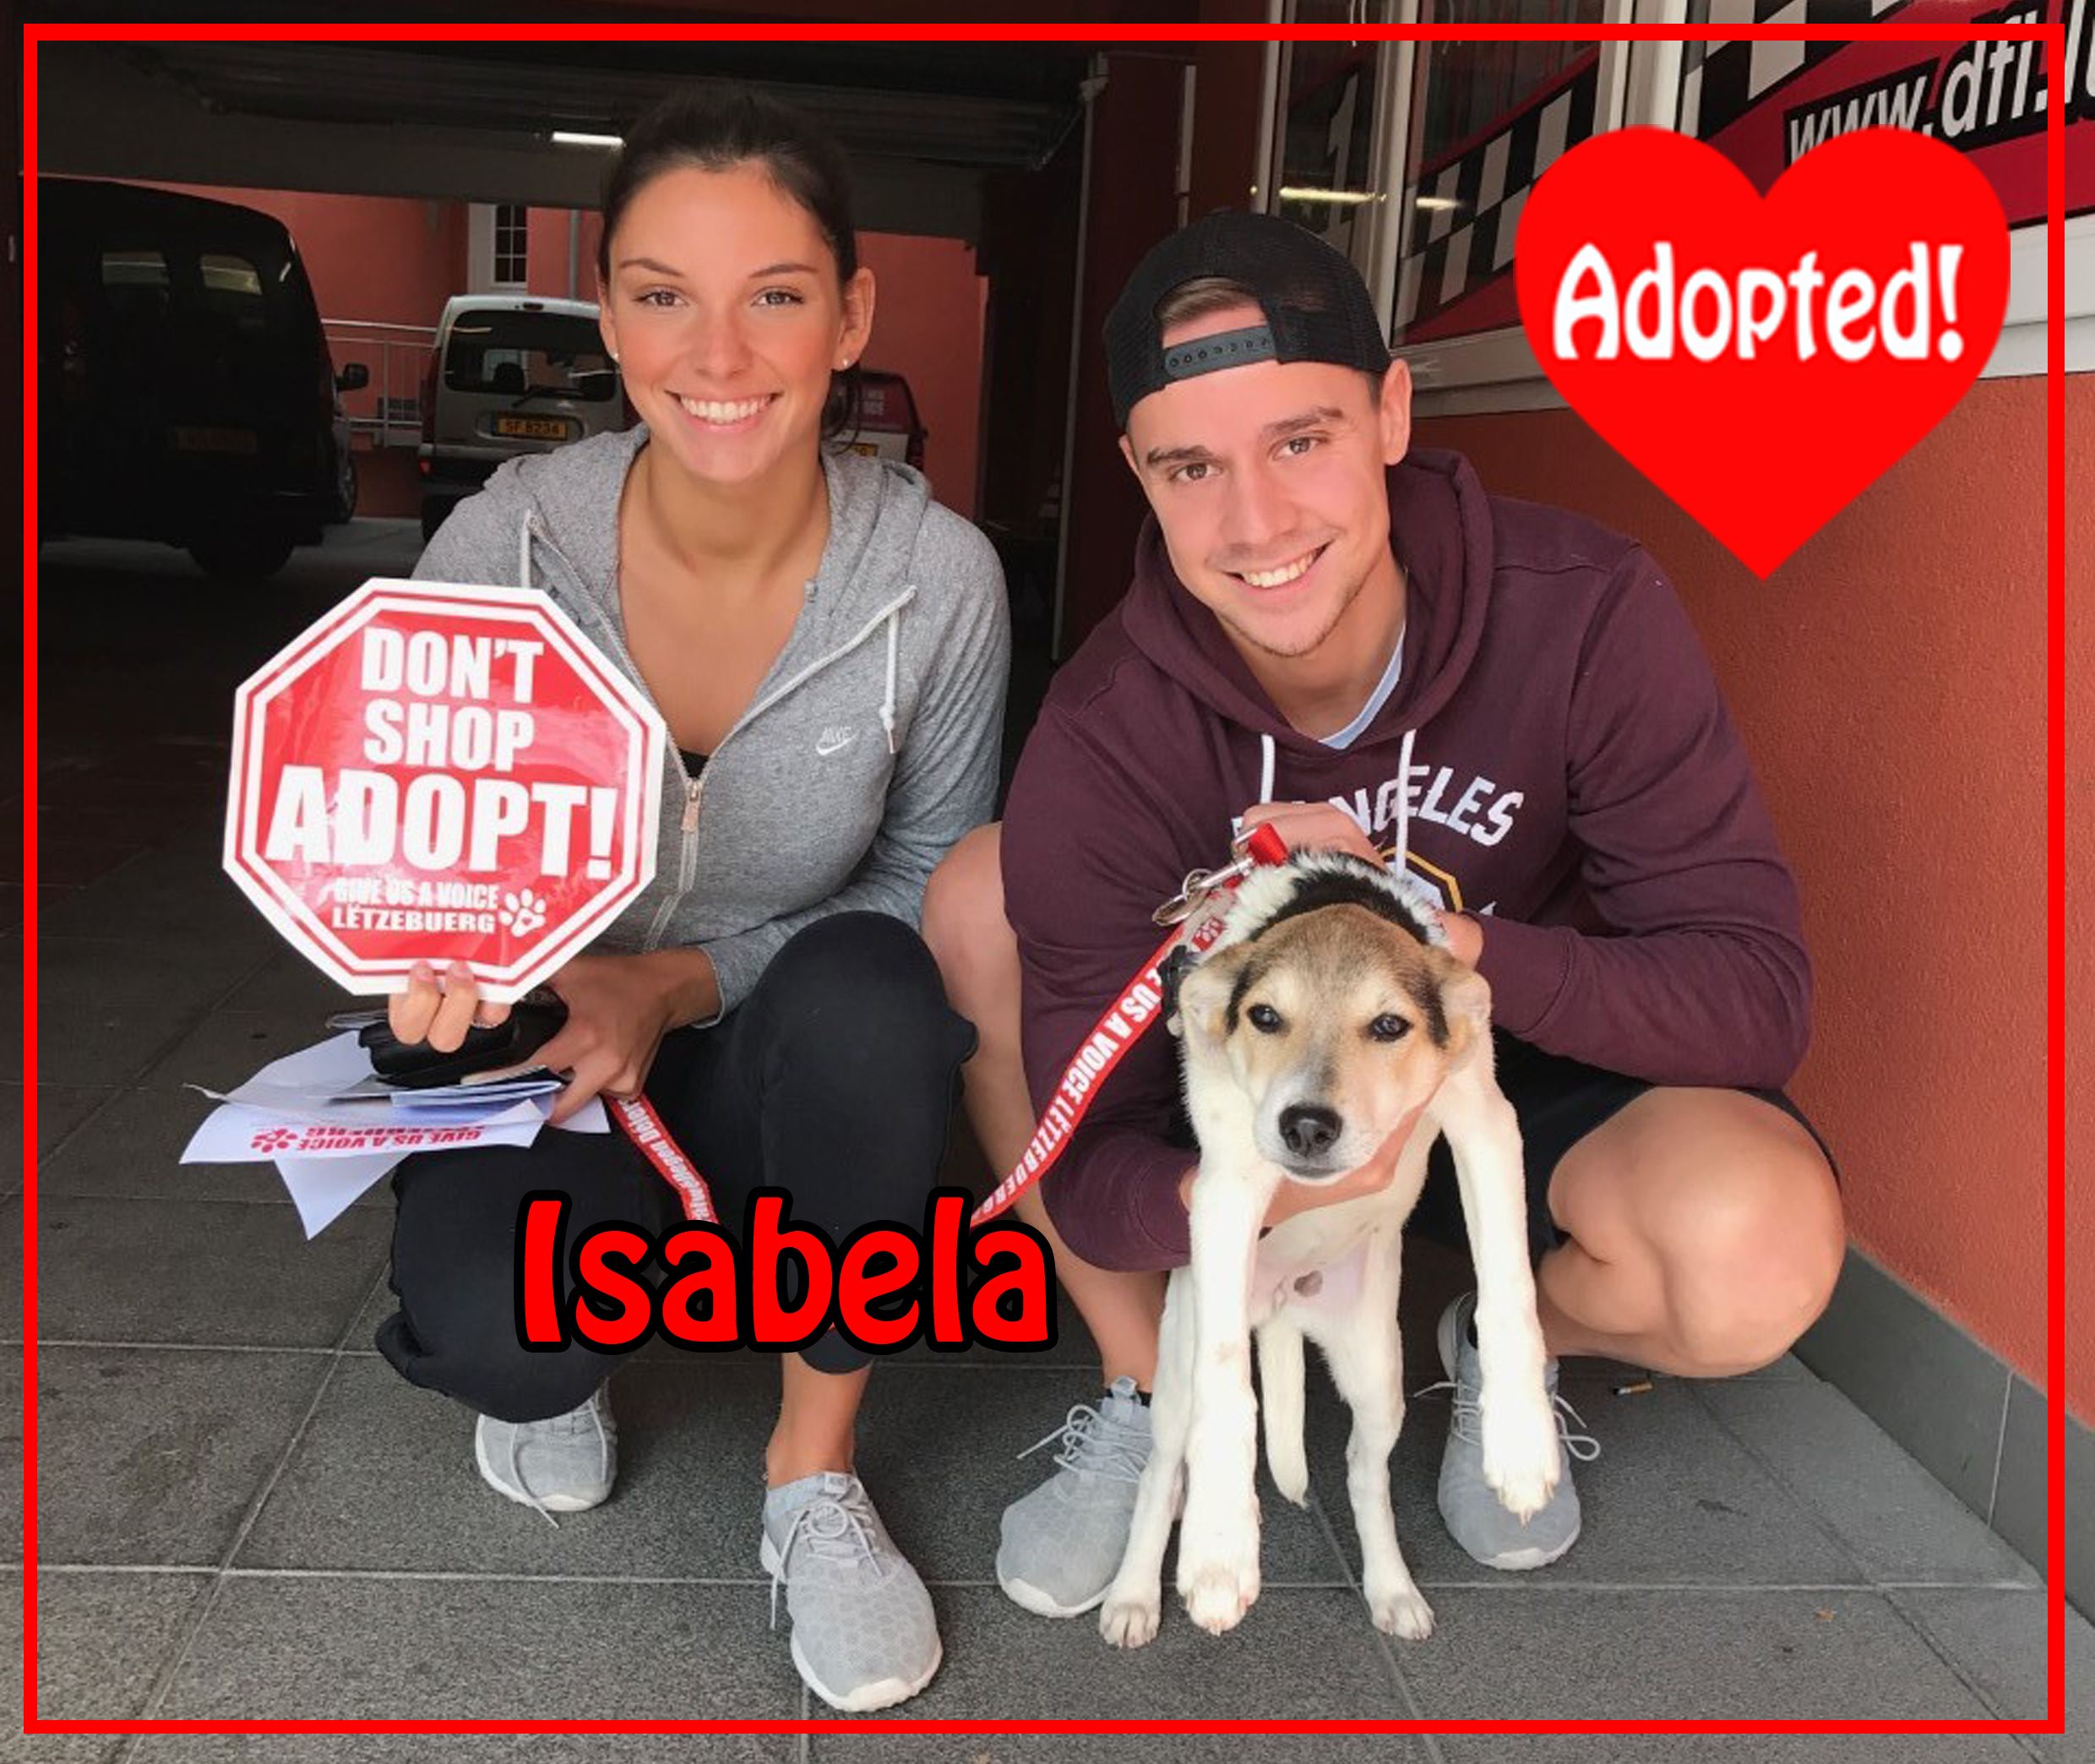 isabela-adopted-copy